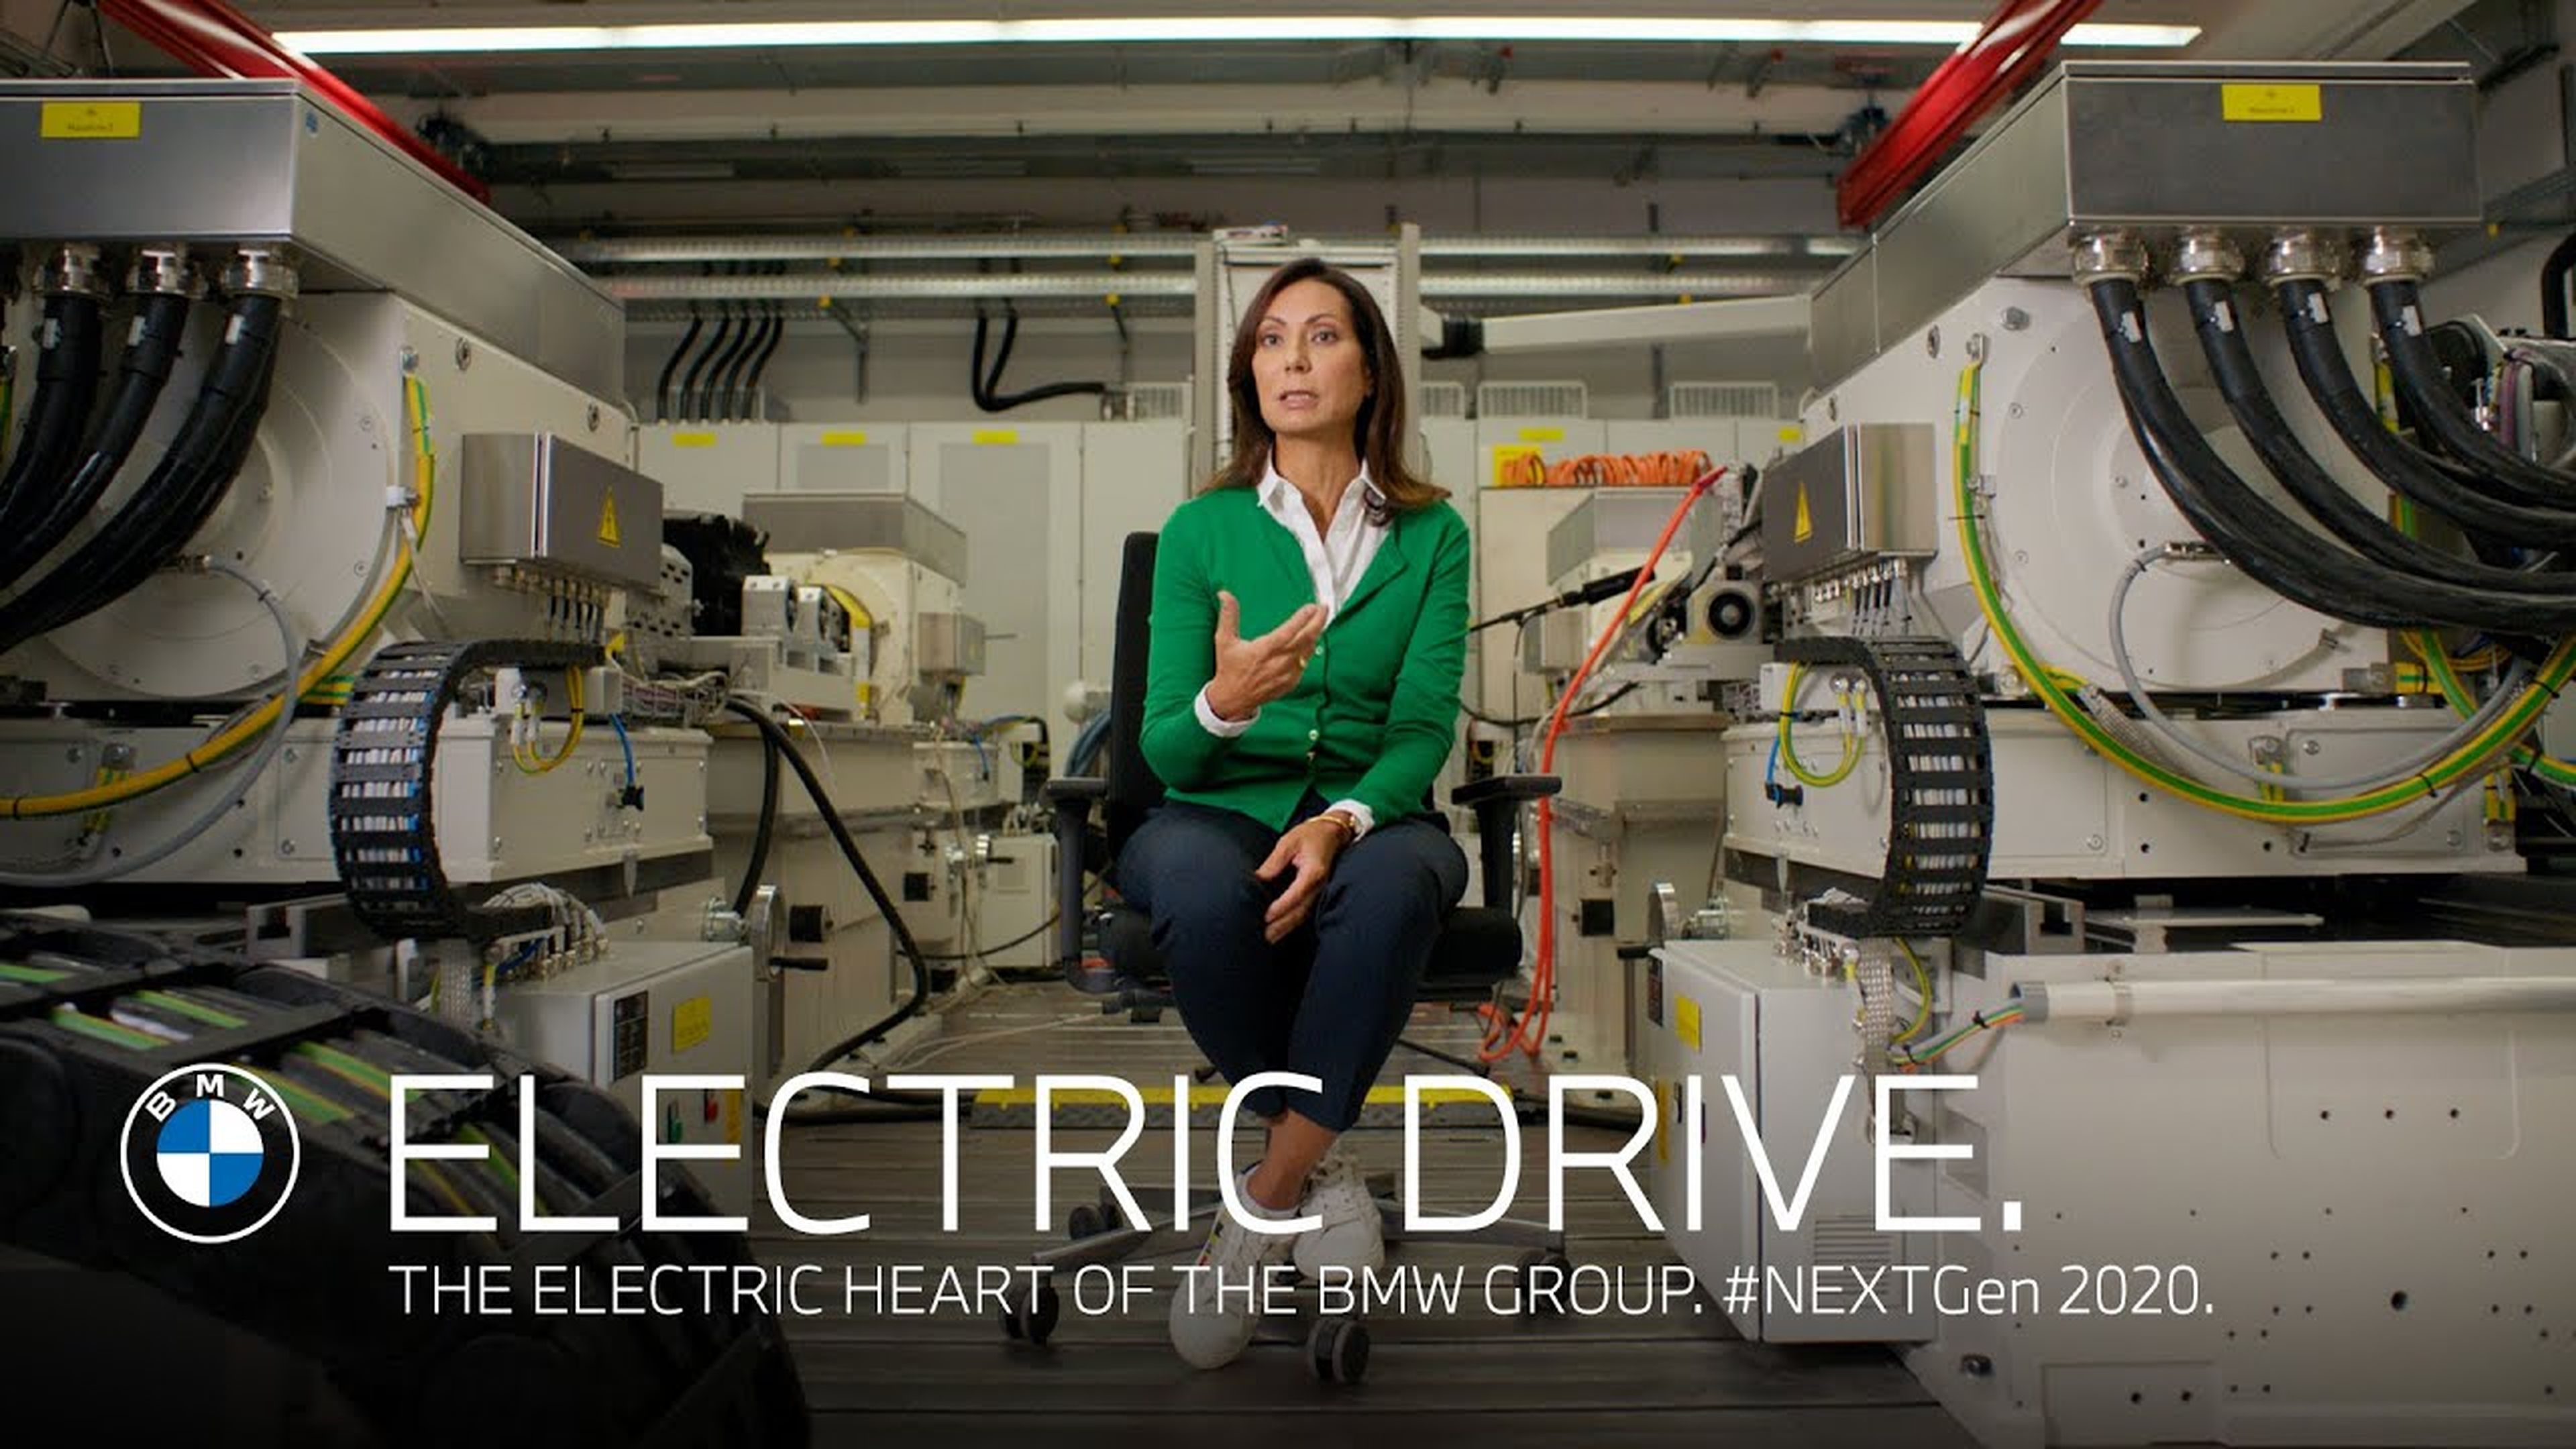 BMW Electric Drive - The electric heart of the BMW Group. | #NEXTGen 2020.